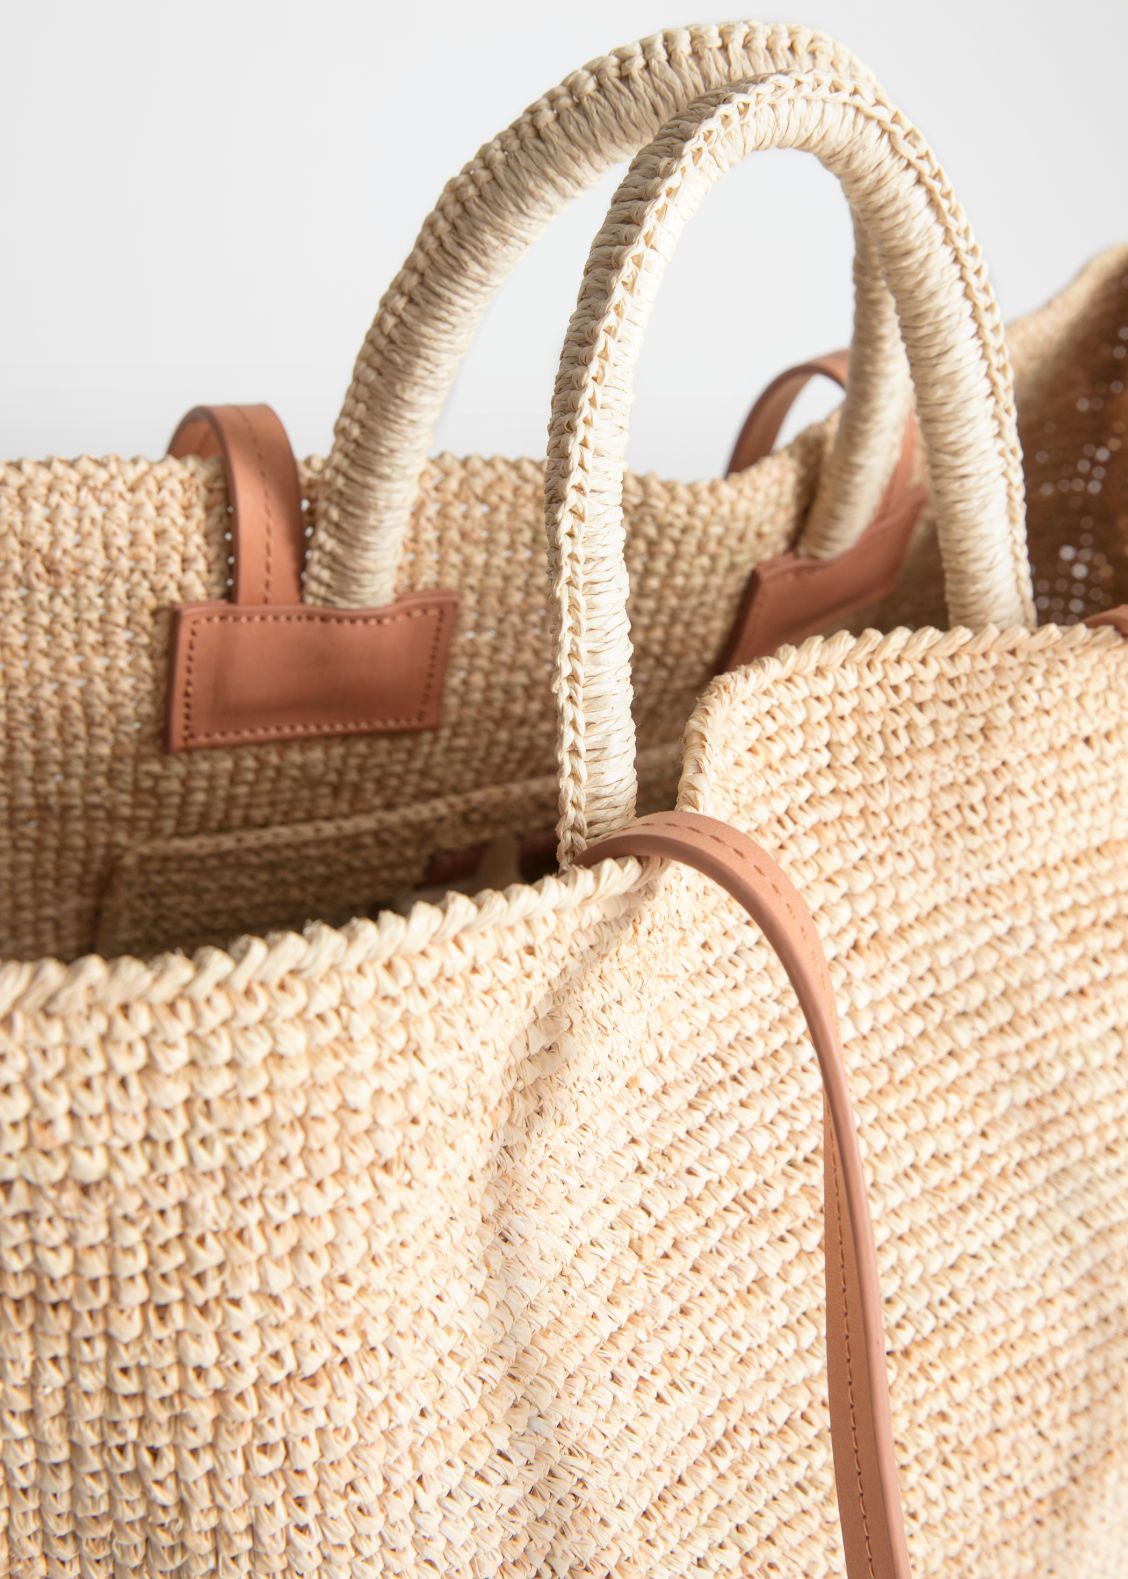 Large Woven Straw Tote | & Other Stories (EU + UK)